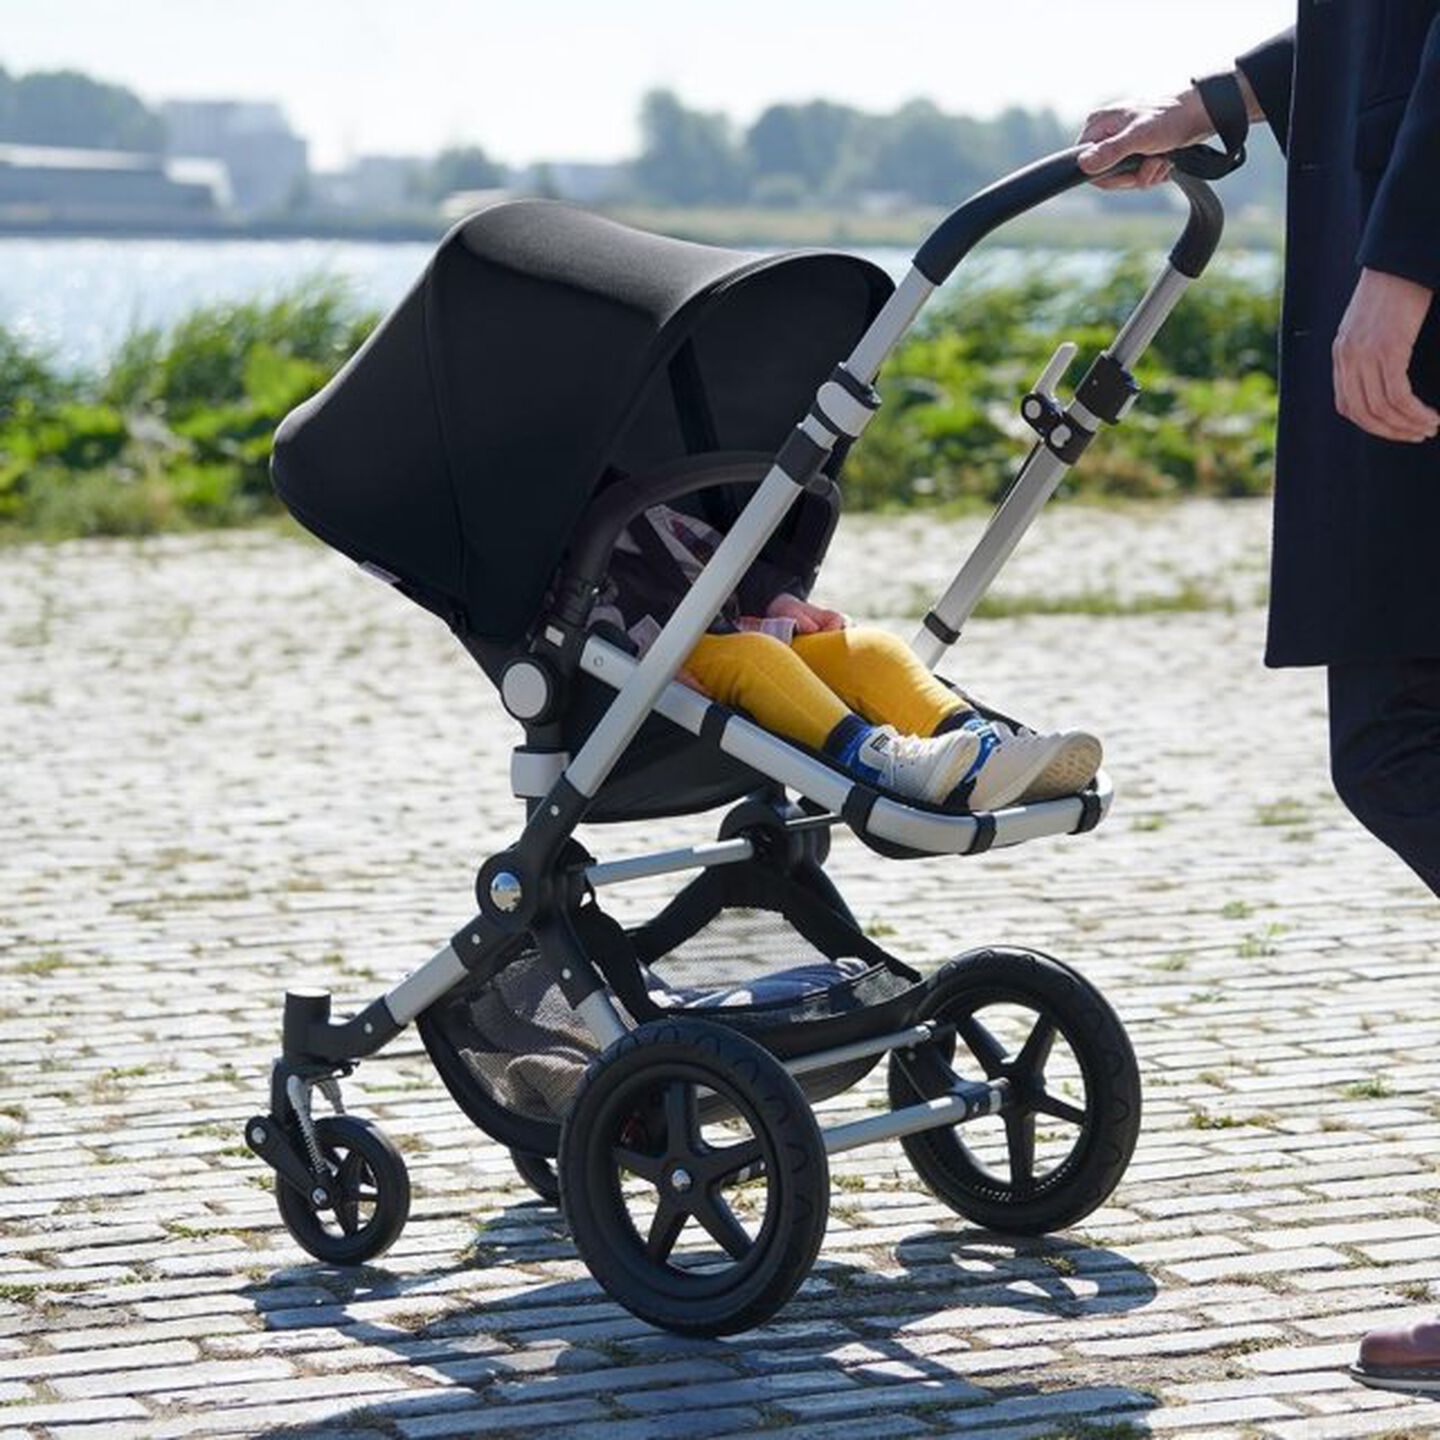 Bugaboo Cameleon 3 specifications